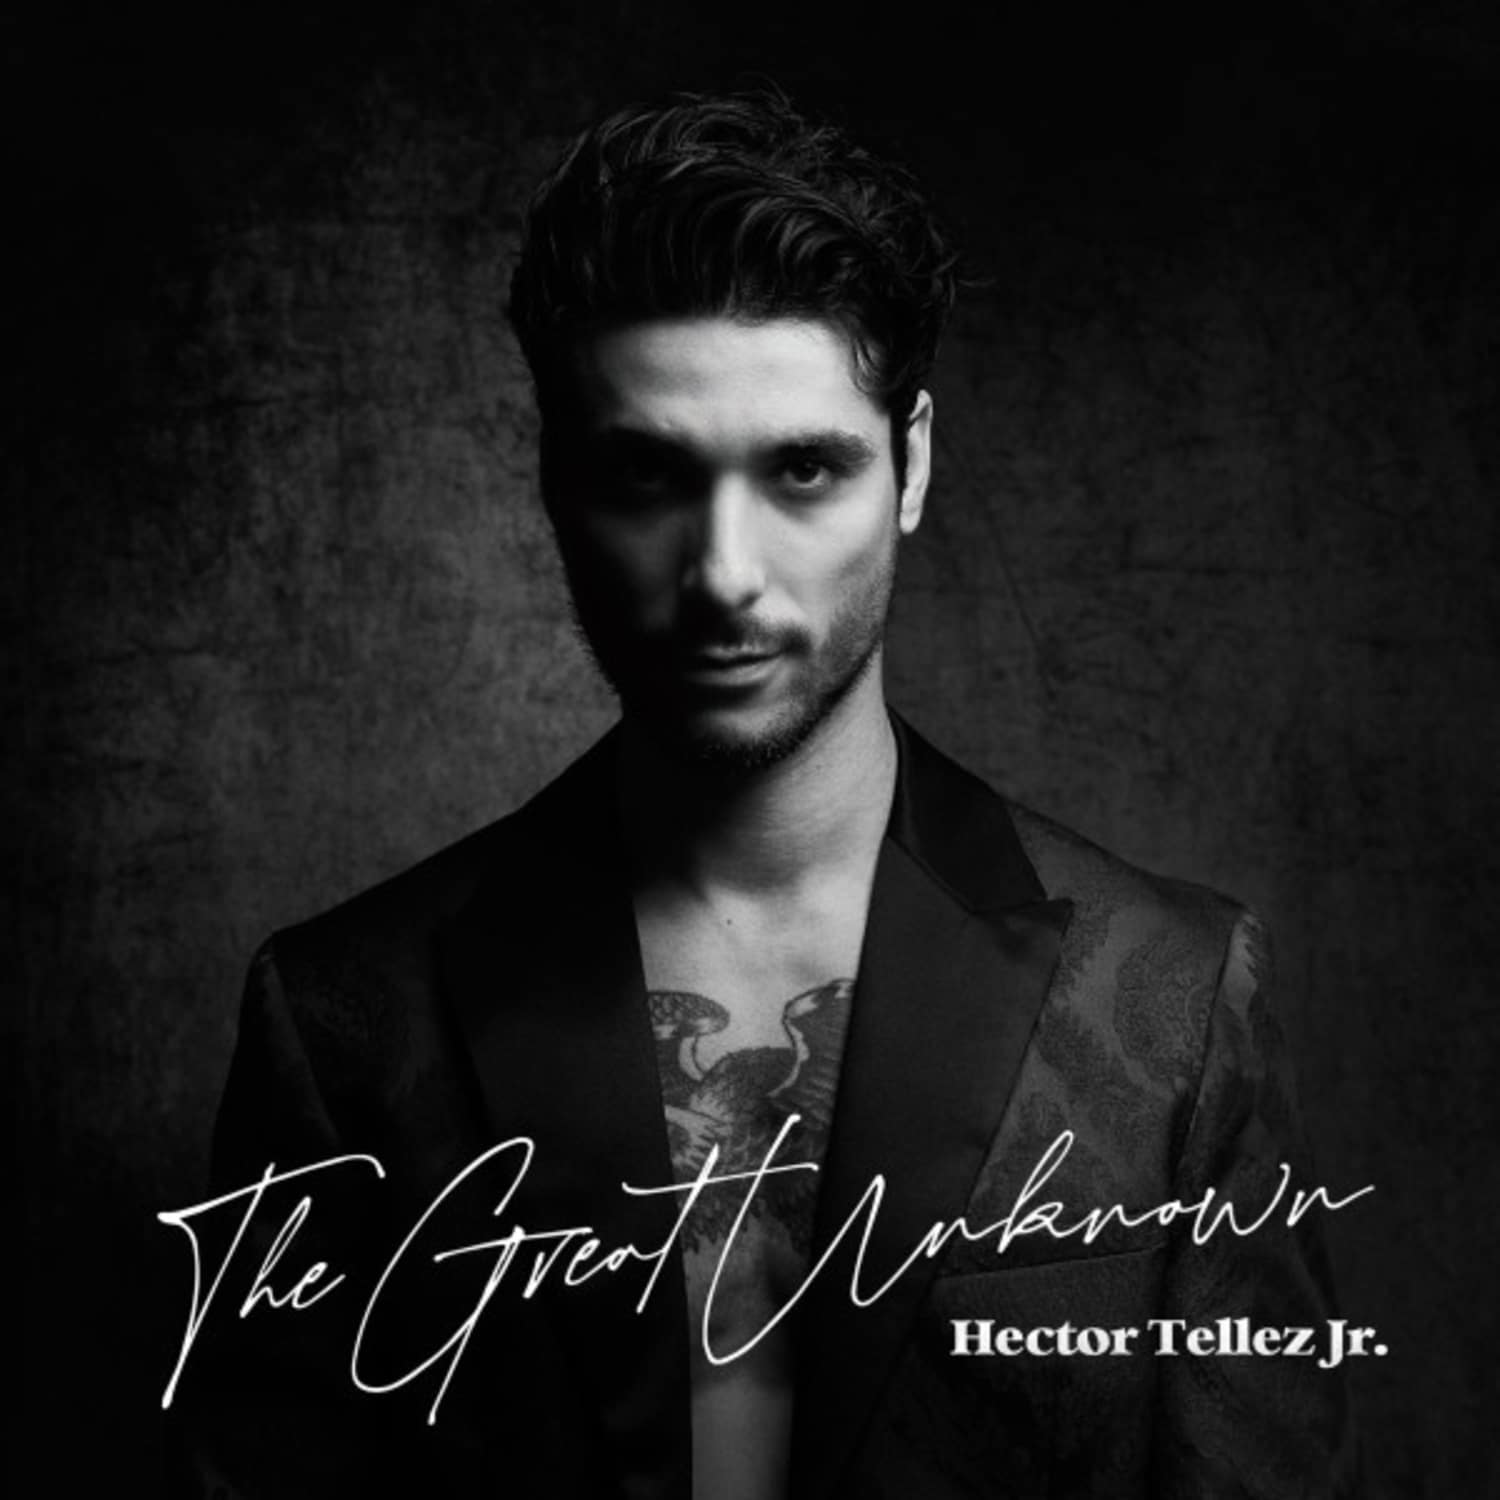 Hector Tellez Jr. - THE GREAT UNKNOWN 